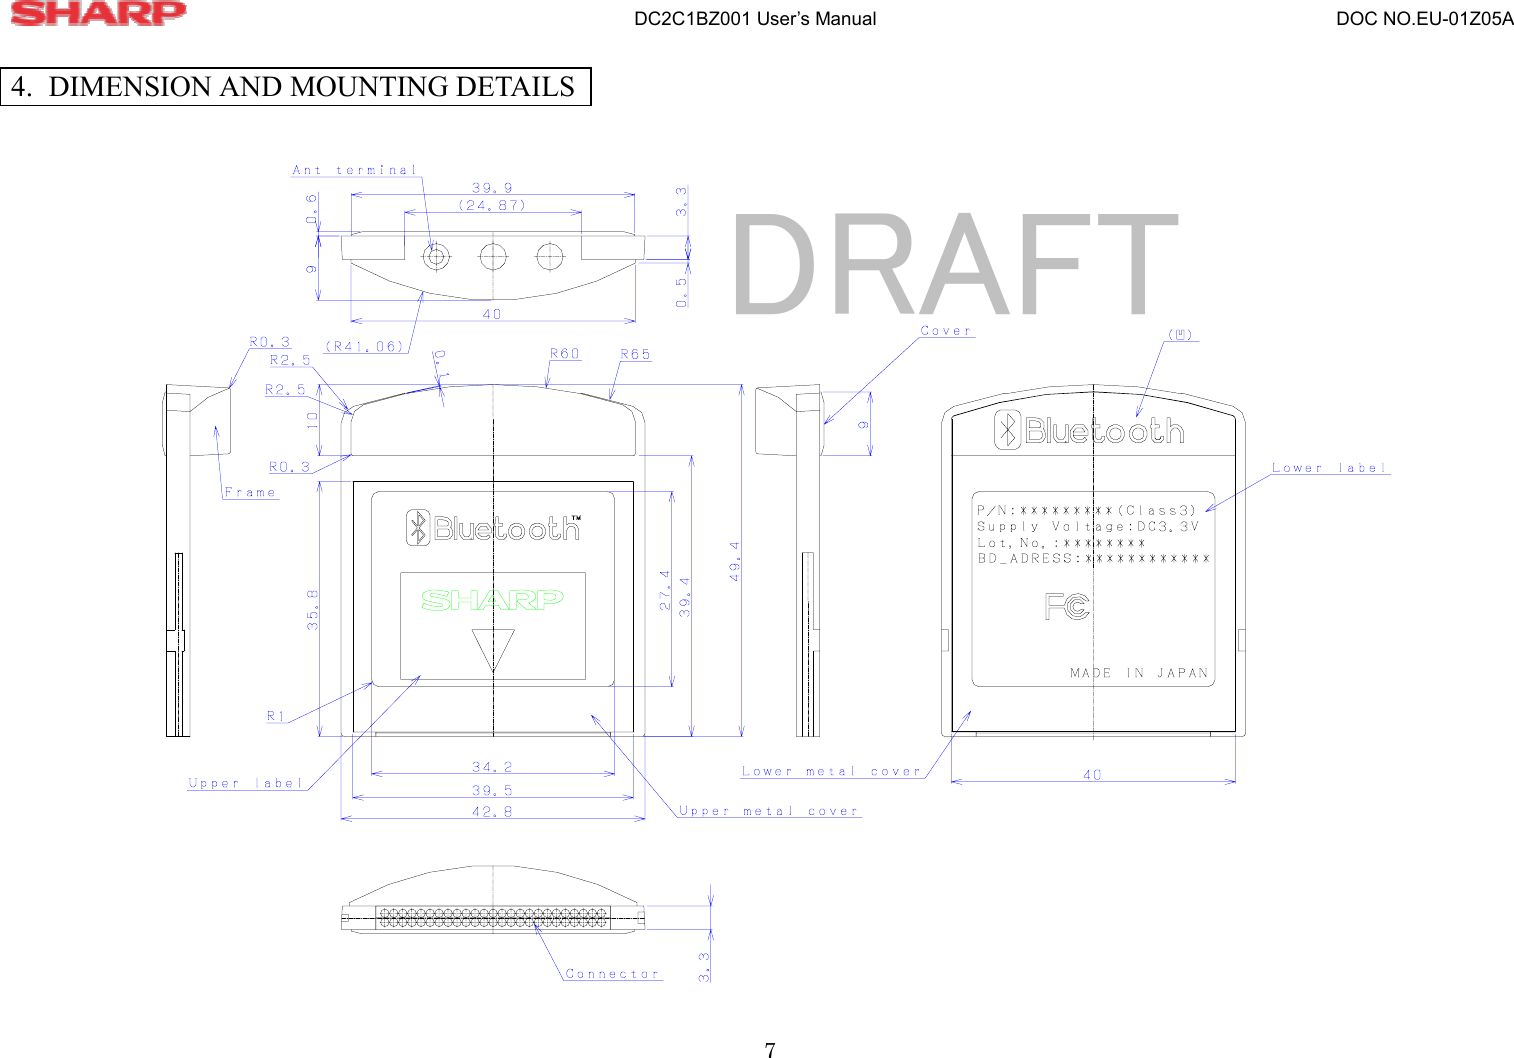                                          DC2C1BZ001 User’s Manual                                                 DOC NO.EU-01Z05A 7  4.  DIMENSION AND MOUNTING DETAILS   DRAFT 